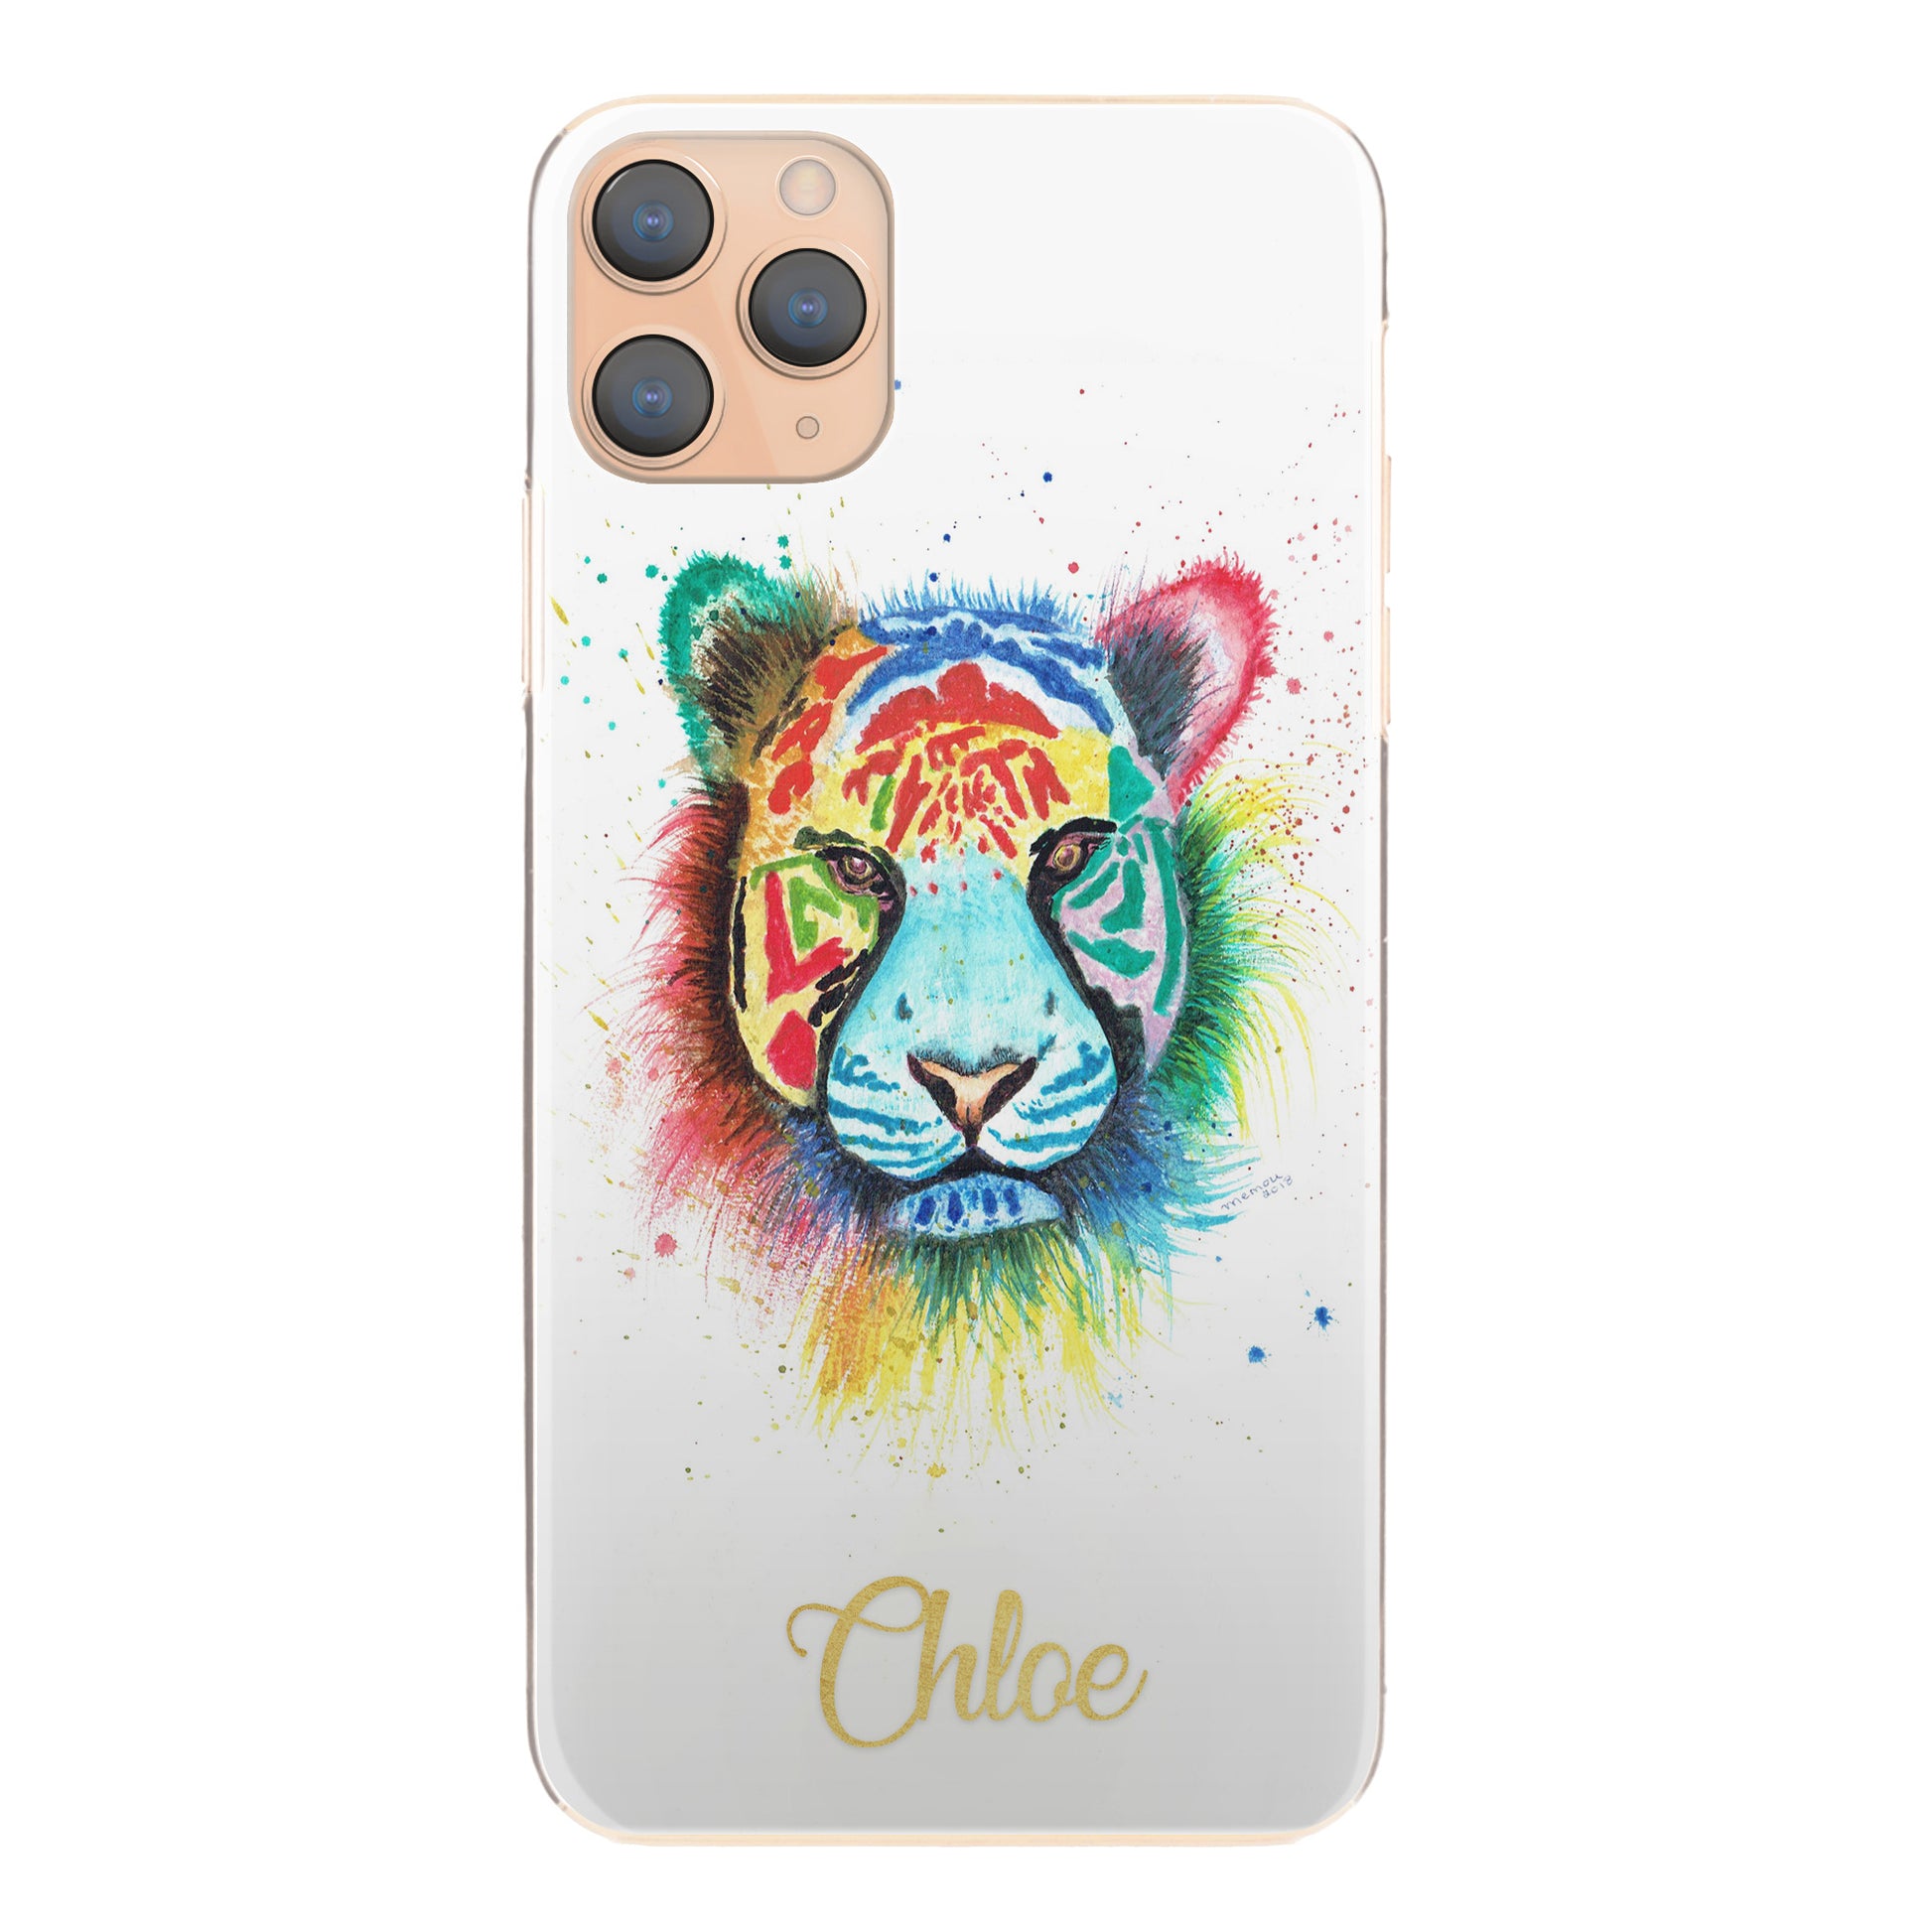 Personalised Motorola Phone Hard Case with Rainbow Tiger and Gold Text